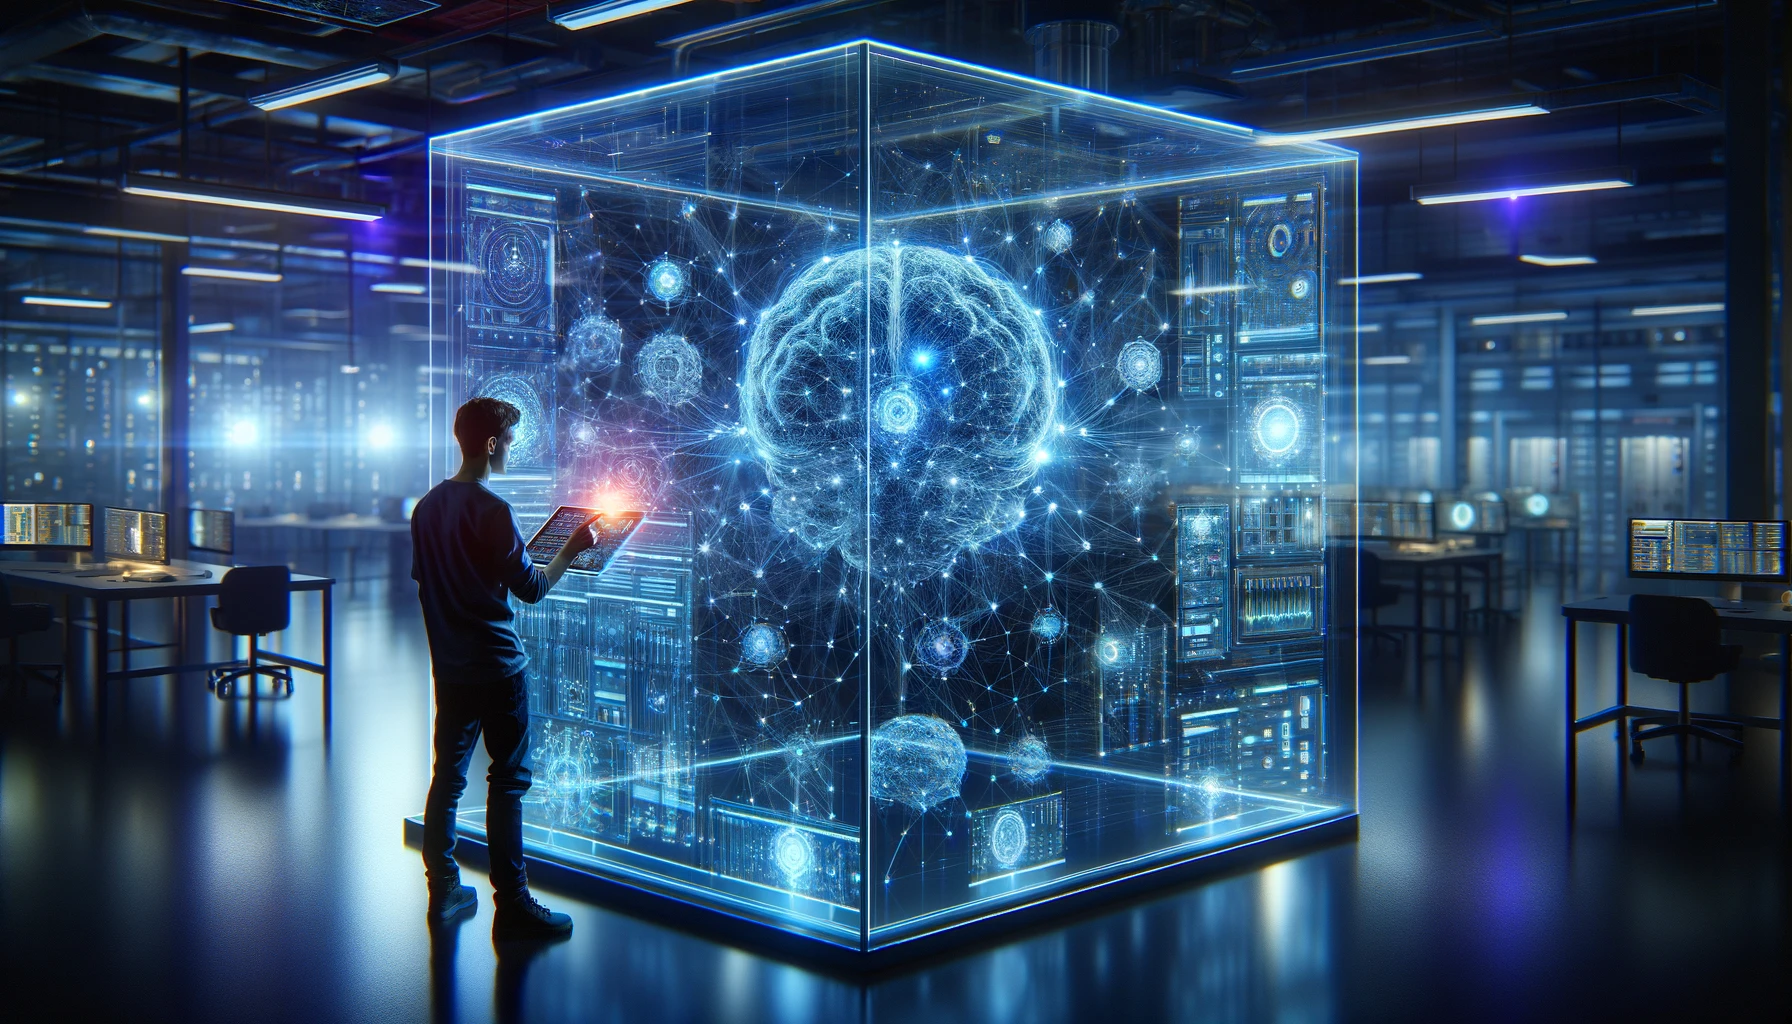 A vivid portrayal of an advanced AI neural network as a glowing labyrinth of connections and nodes, enveloping a large, transparent digital screen. A focused engineer, in modern attire, is actively engaged with the network, fine-tuning the settings on a holographic interface. The scene is set in a cutting-edge laboratory, illuminated with ambient blue and purple lights, evoking a sense of innovation and urgency. The style is photorealistic. Camera: Canon EOS R5. Lens: Canon RF 24-105mm F4 L IS USM.